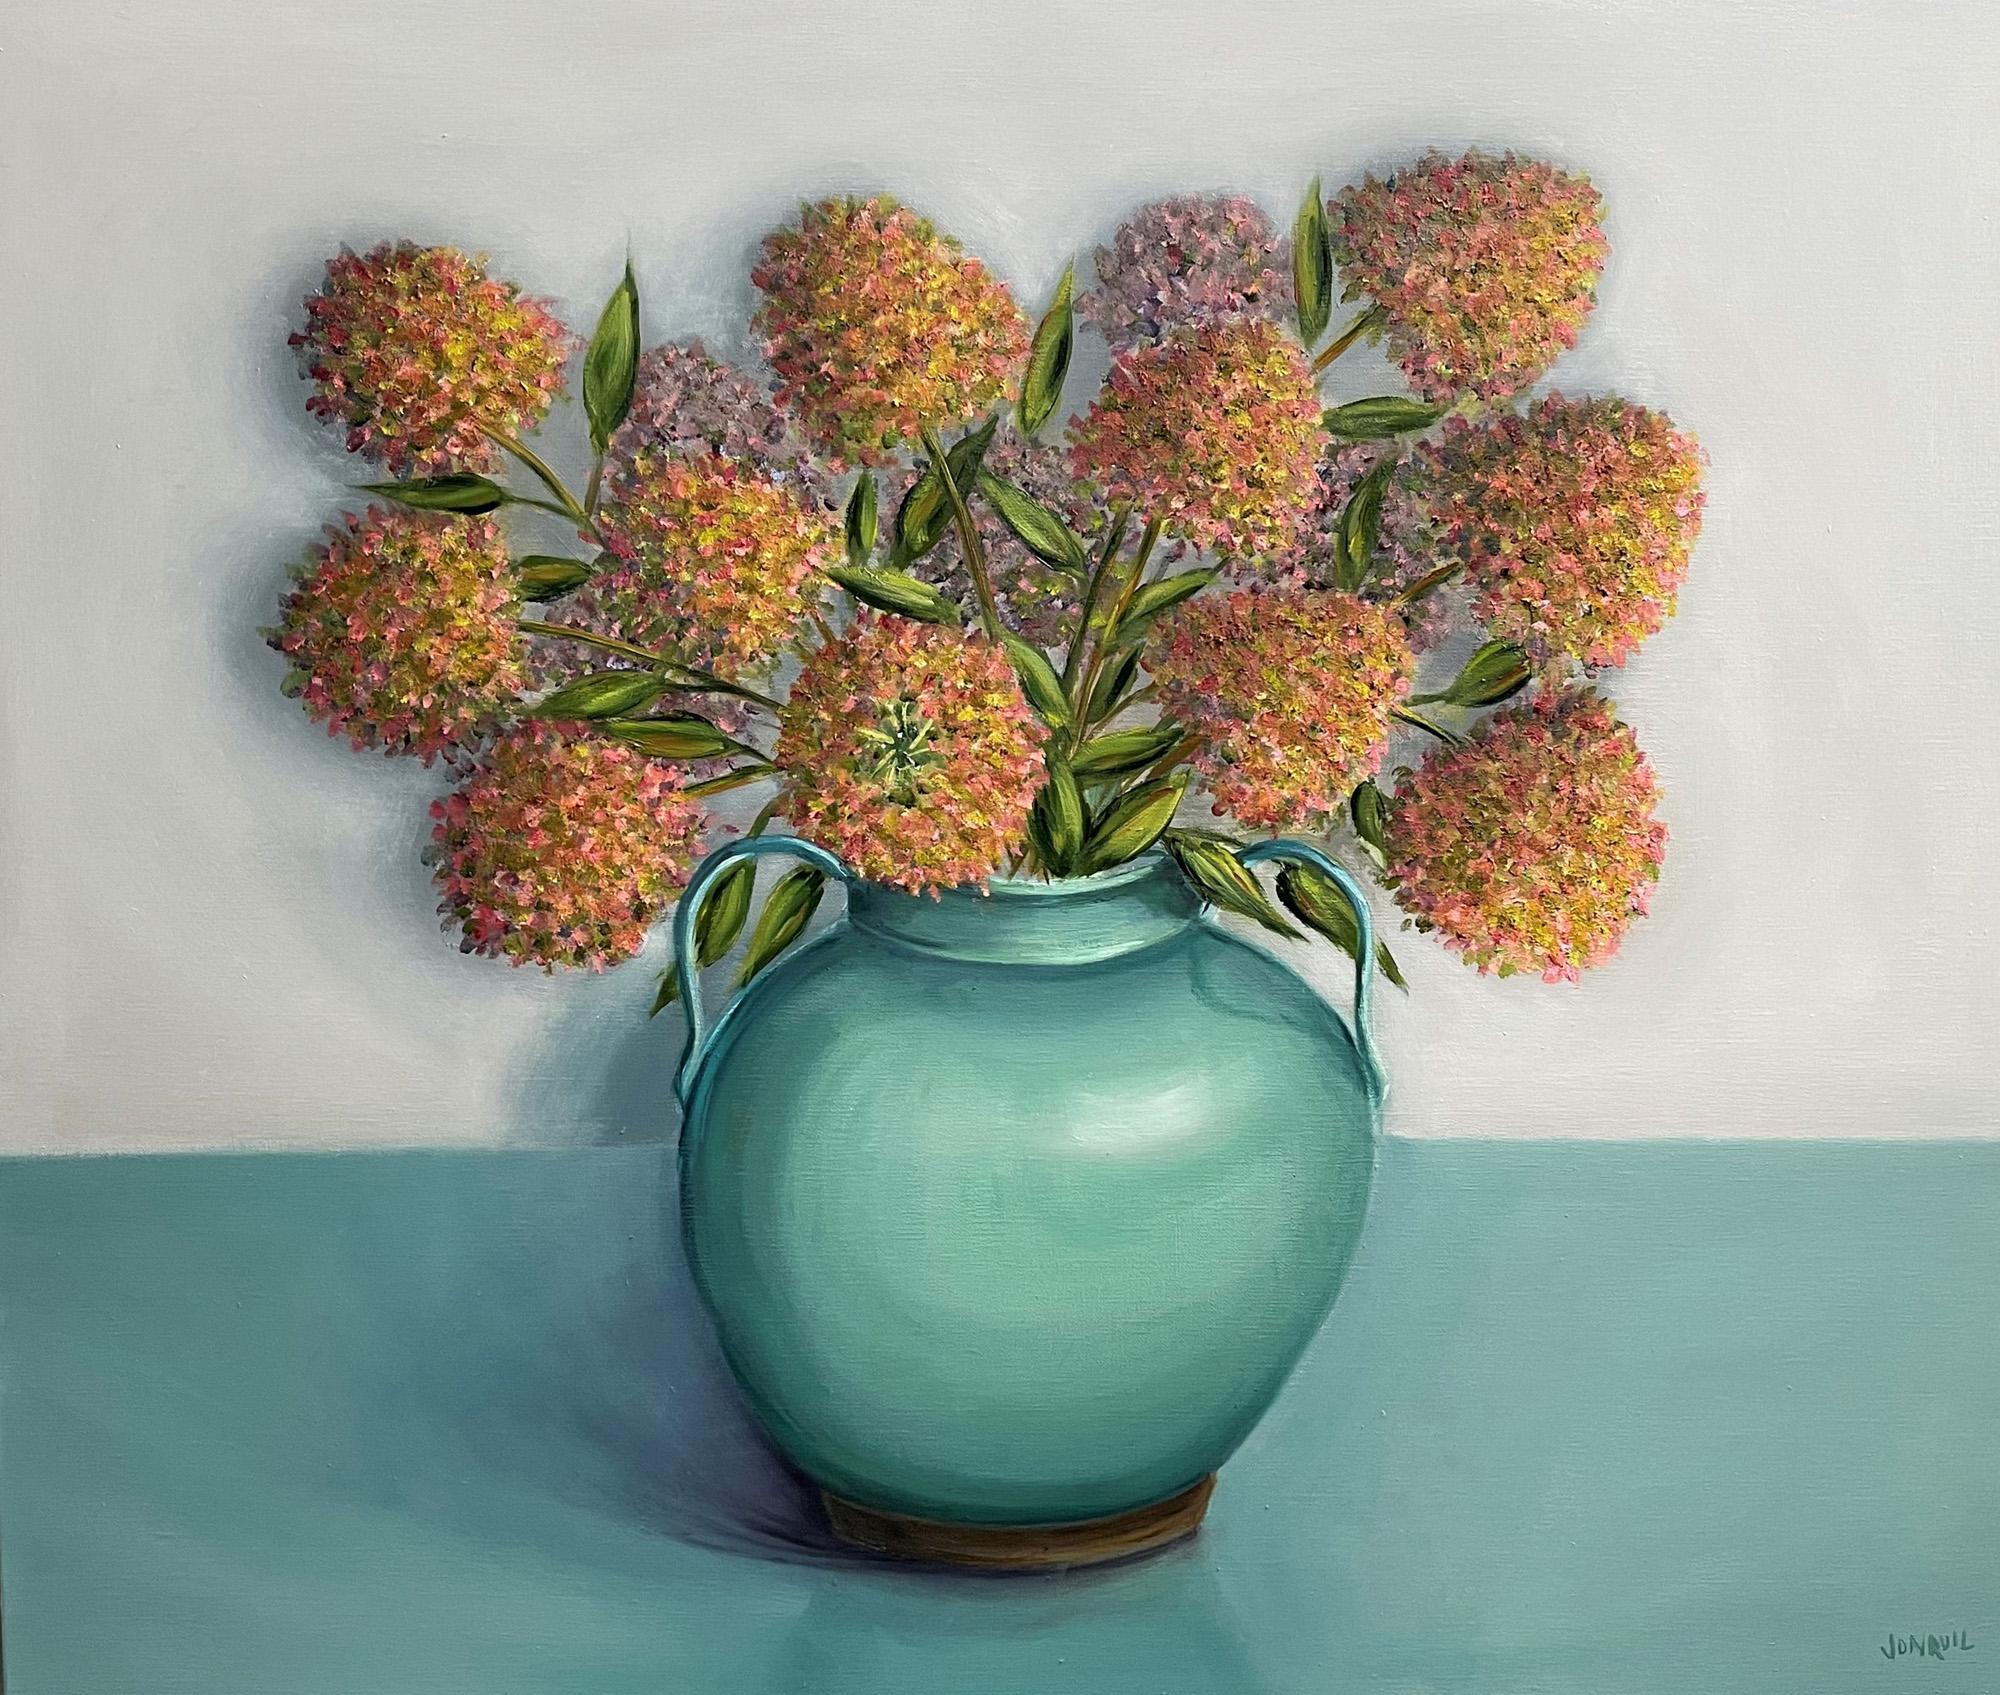 Autumnal Hydrangea Paniculata in a Celadon Jug painting by Jonquil Williamson